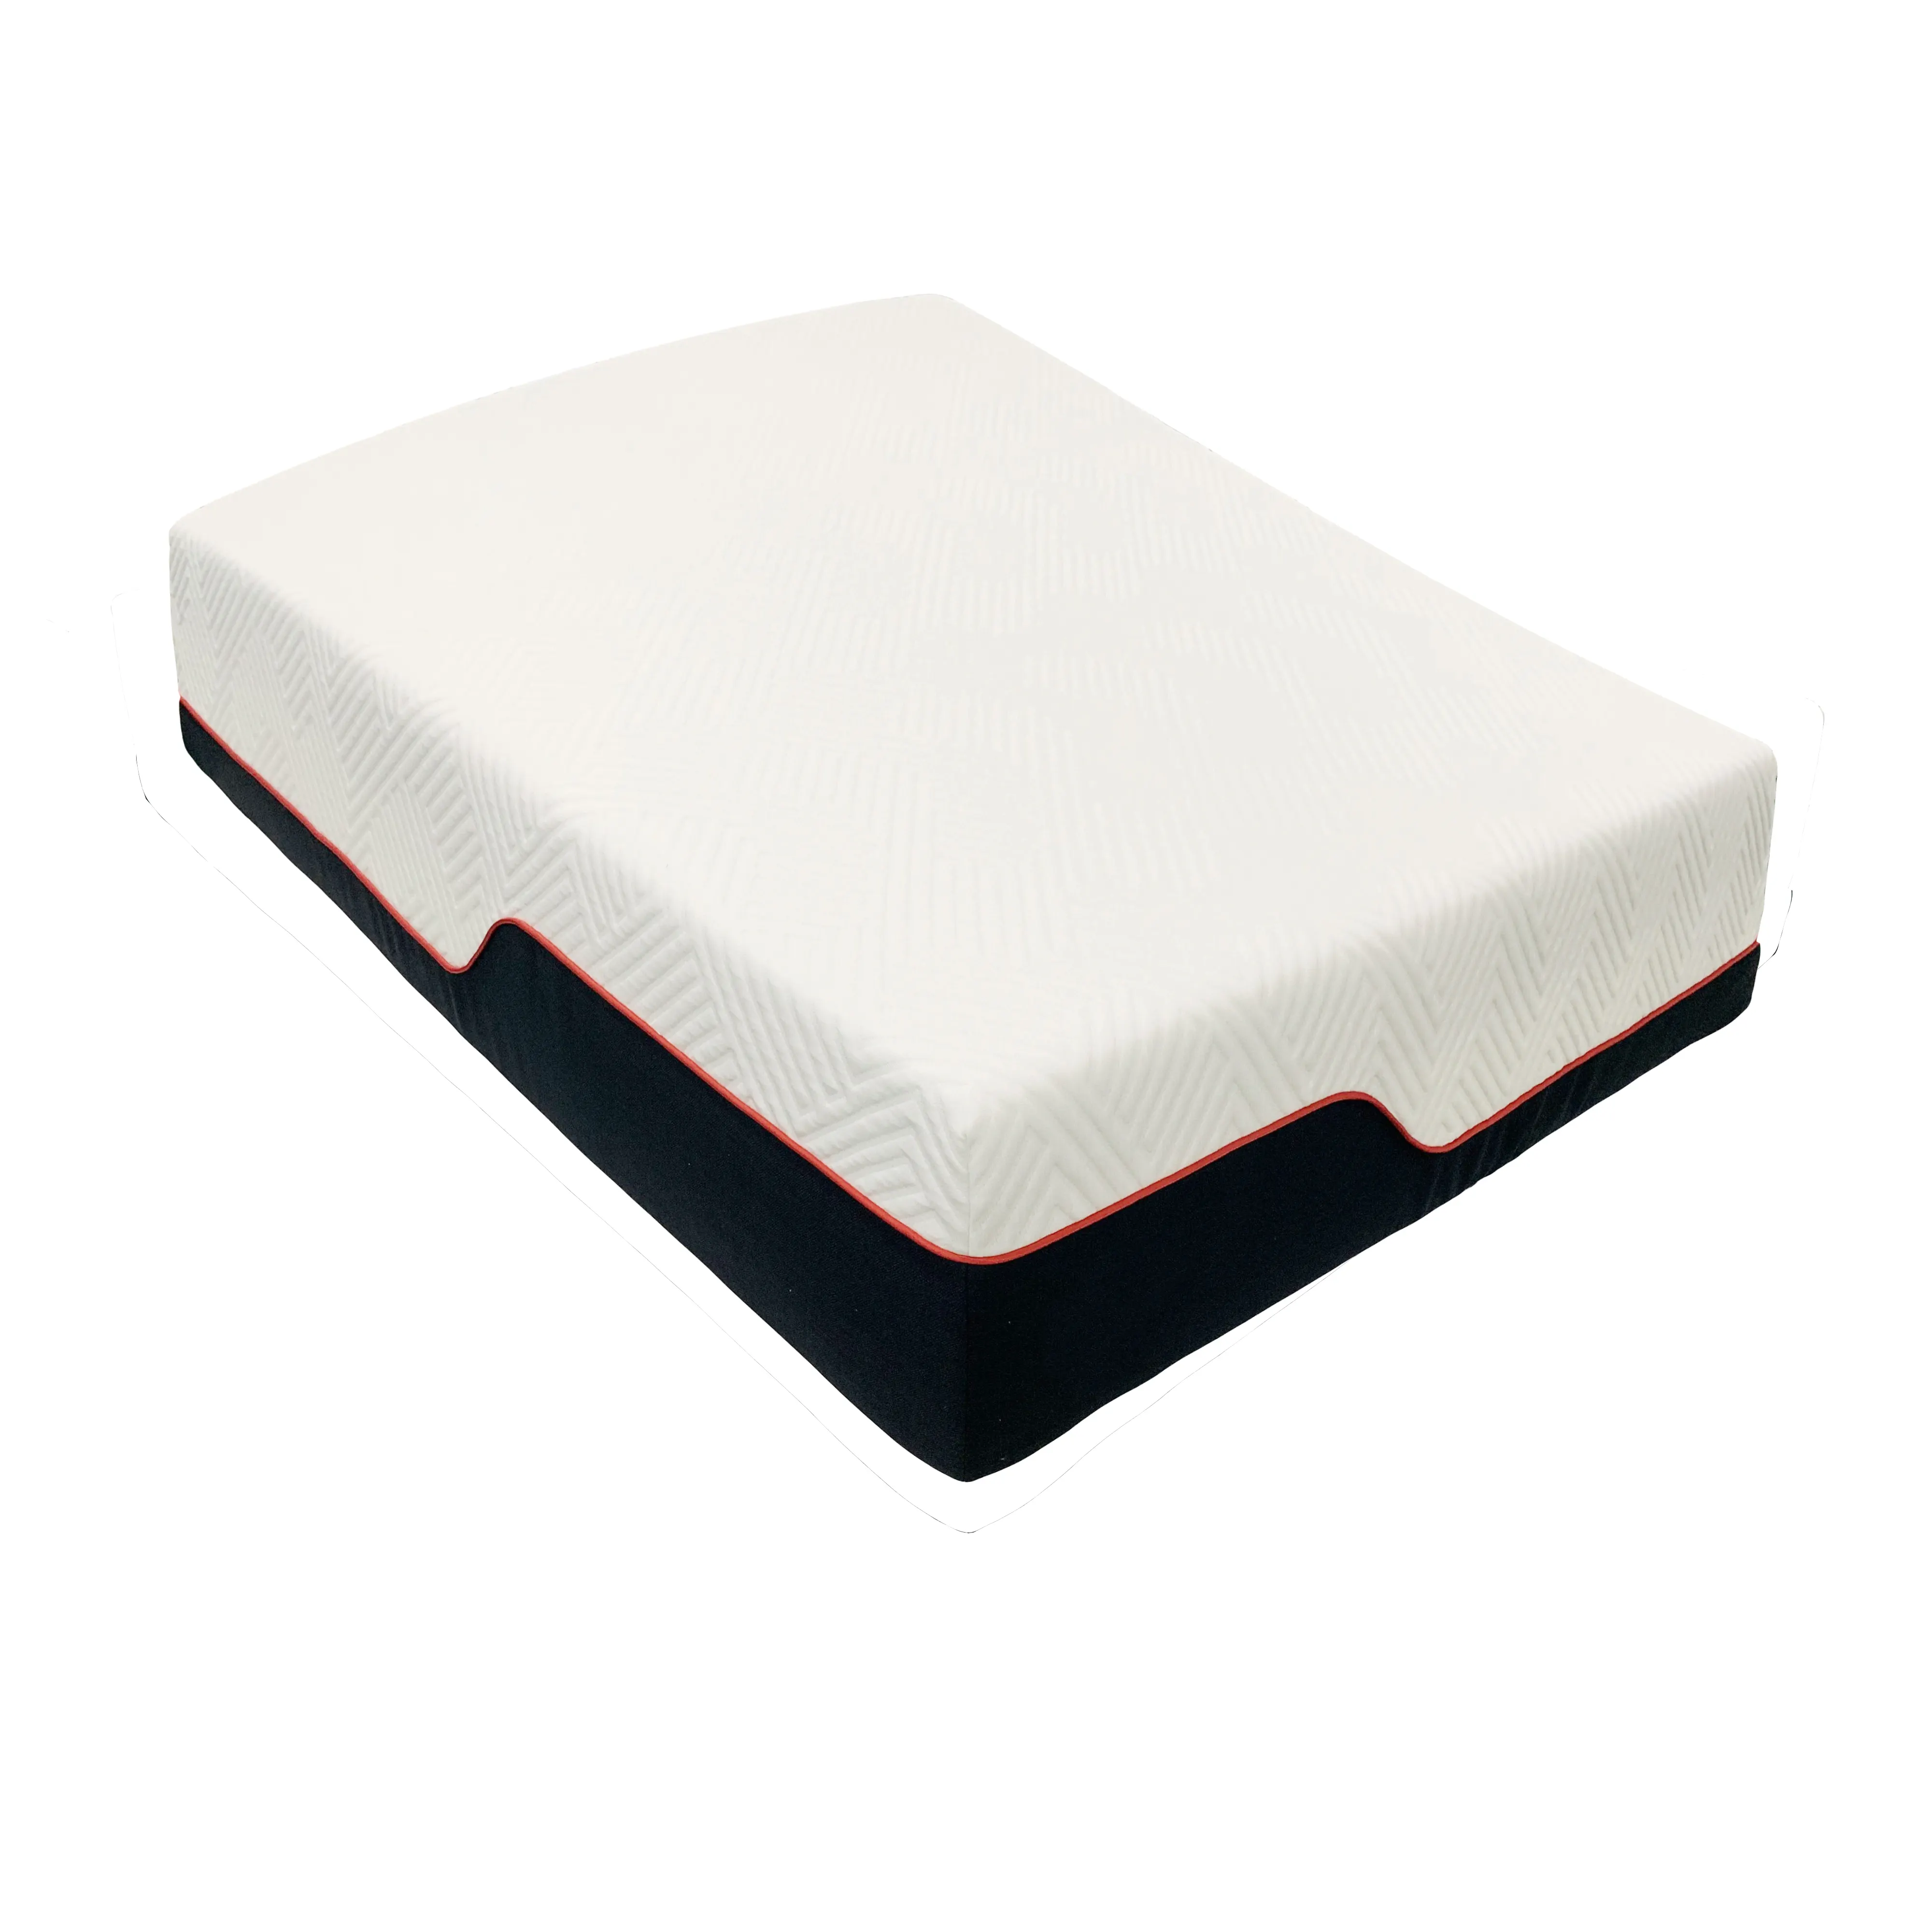 Rolled Vacuumed Memory Foam Mattress Queen King Size for Side Sleepers